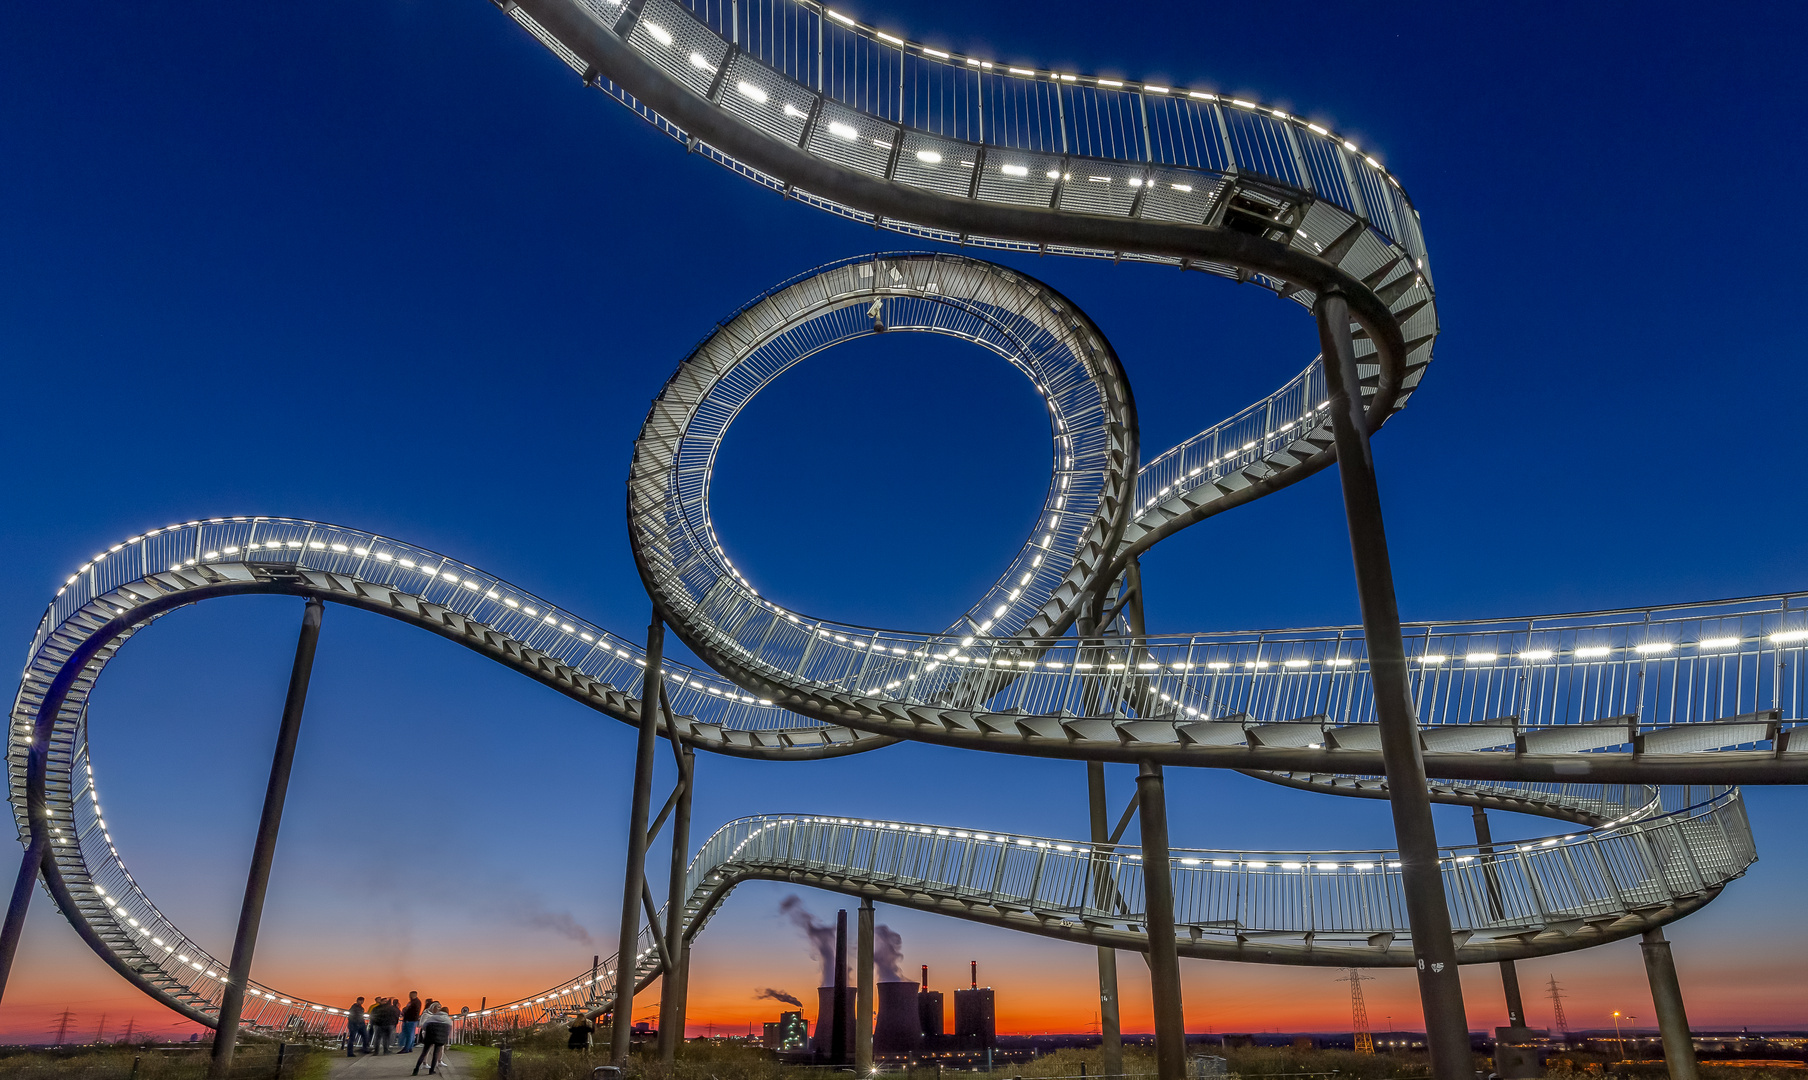 Tiger and Turtle 